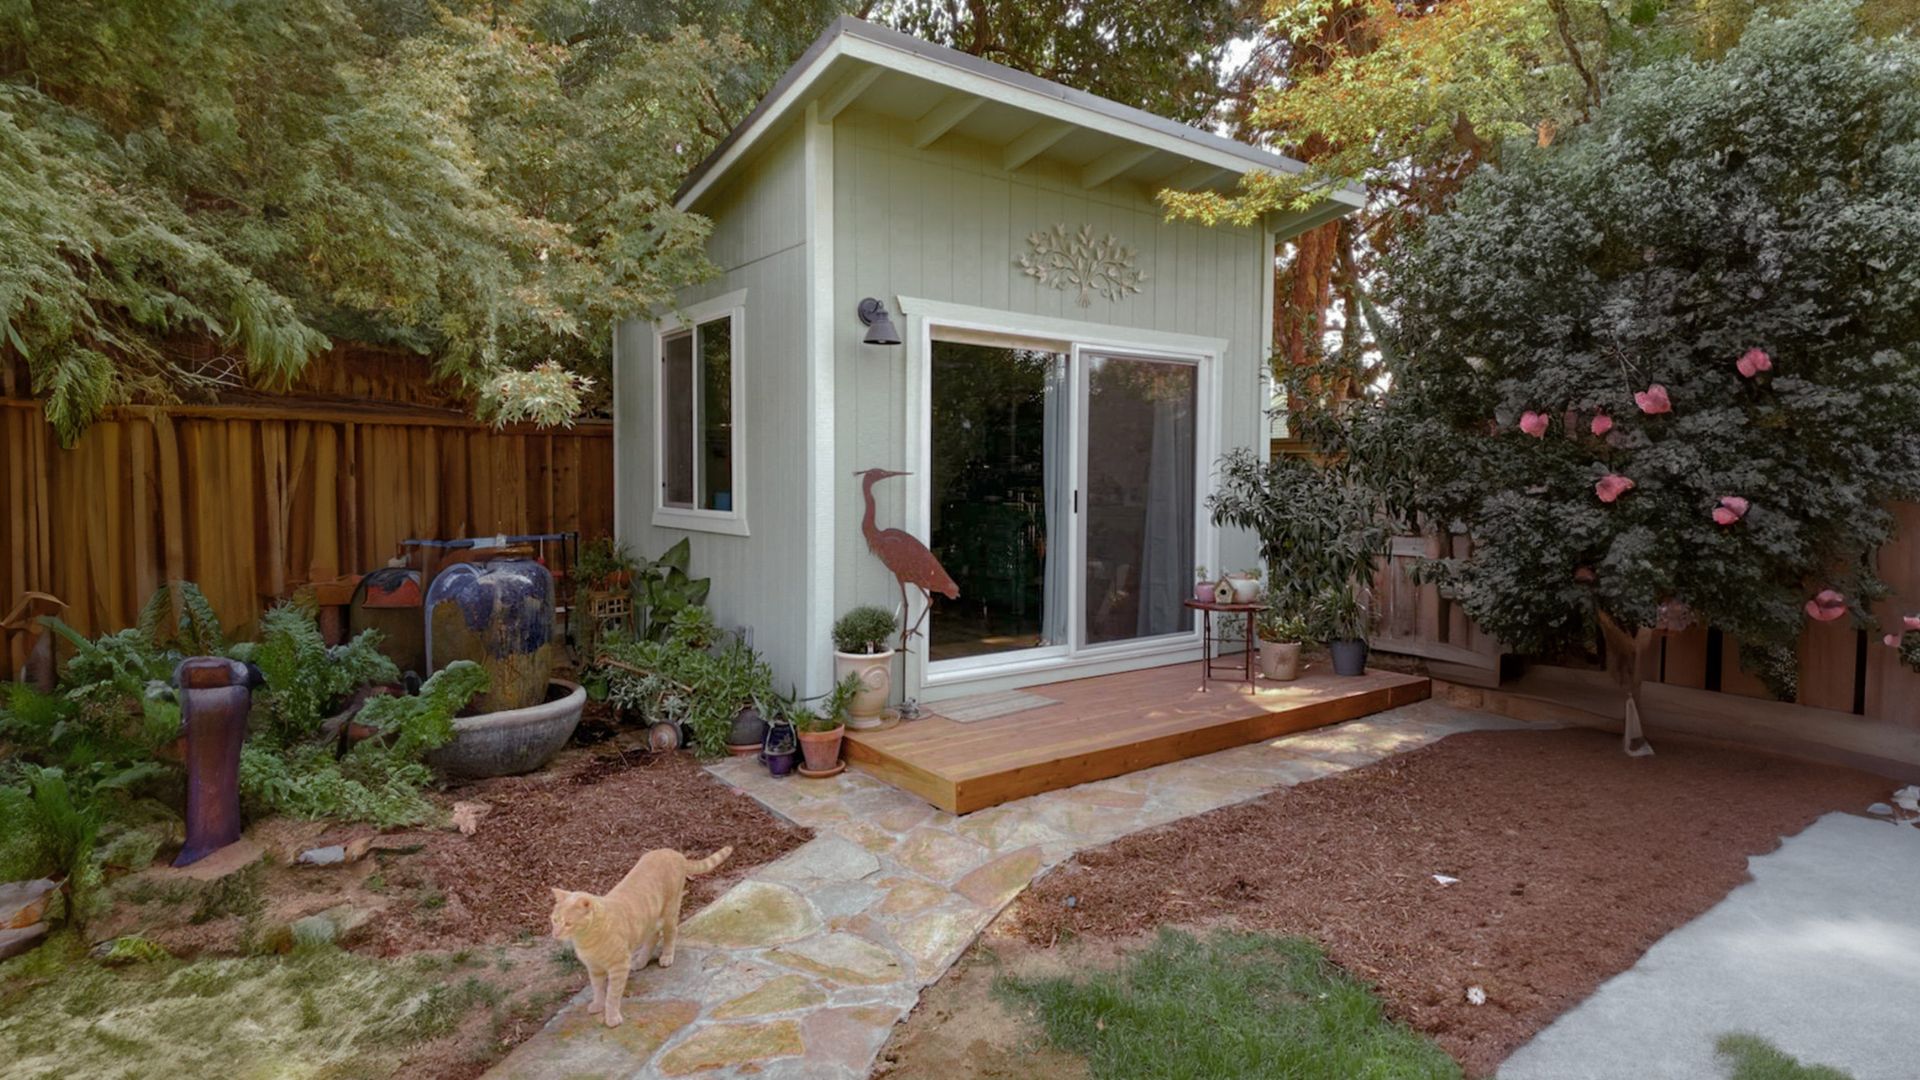 Green lean-to shed in backyard